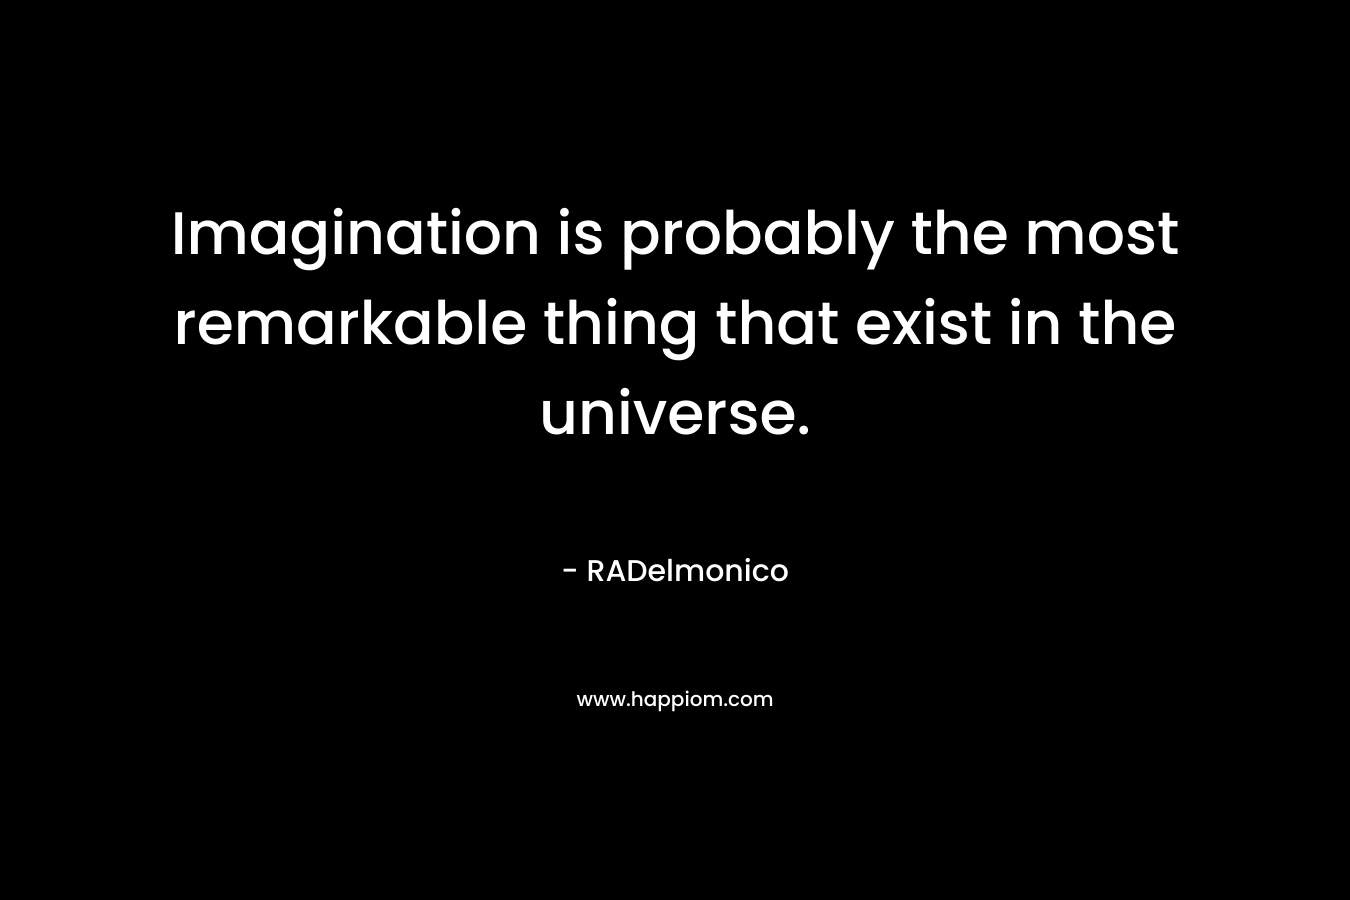 Imagination is probably the most remarkable thing that exist in the universe.